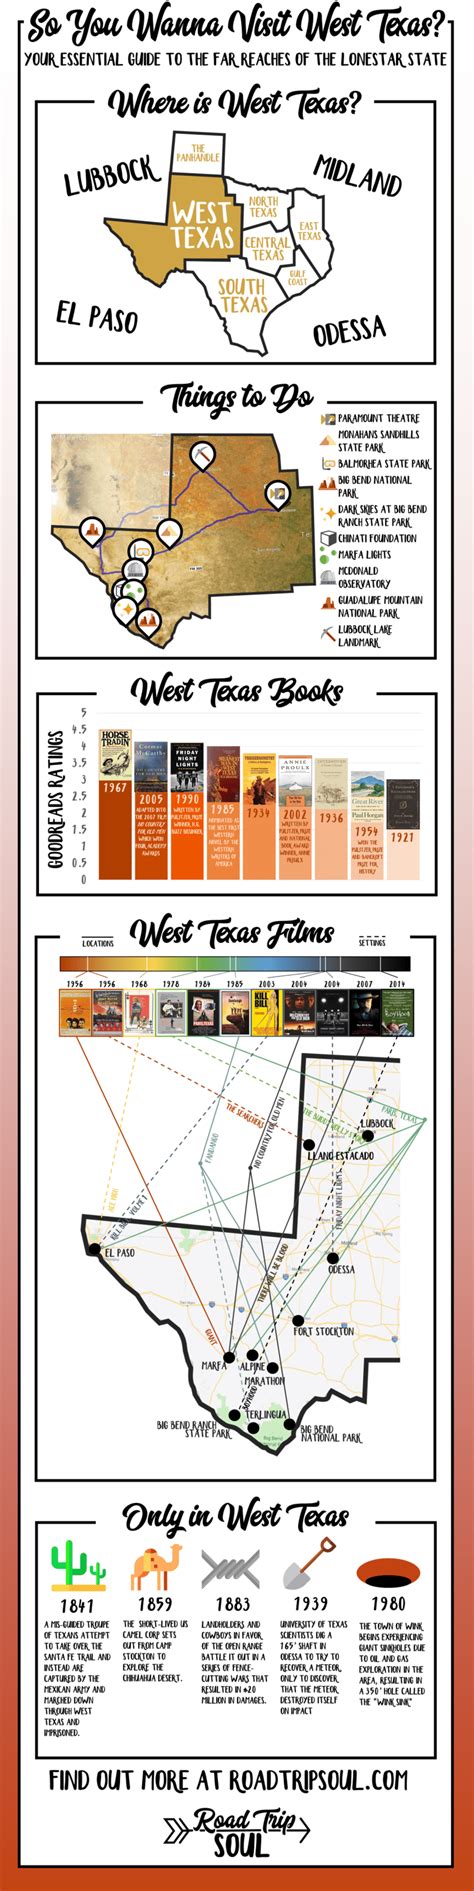 So You Wanna Visit West Texas Road Trip Soul Road Trip Planning